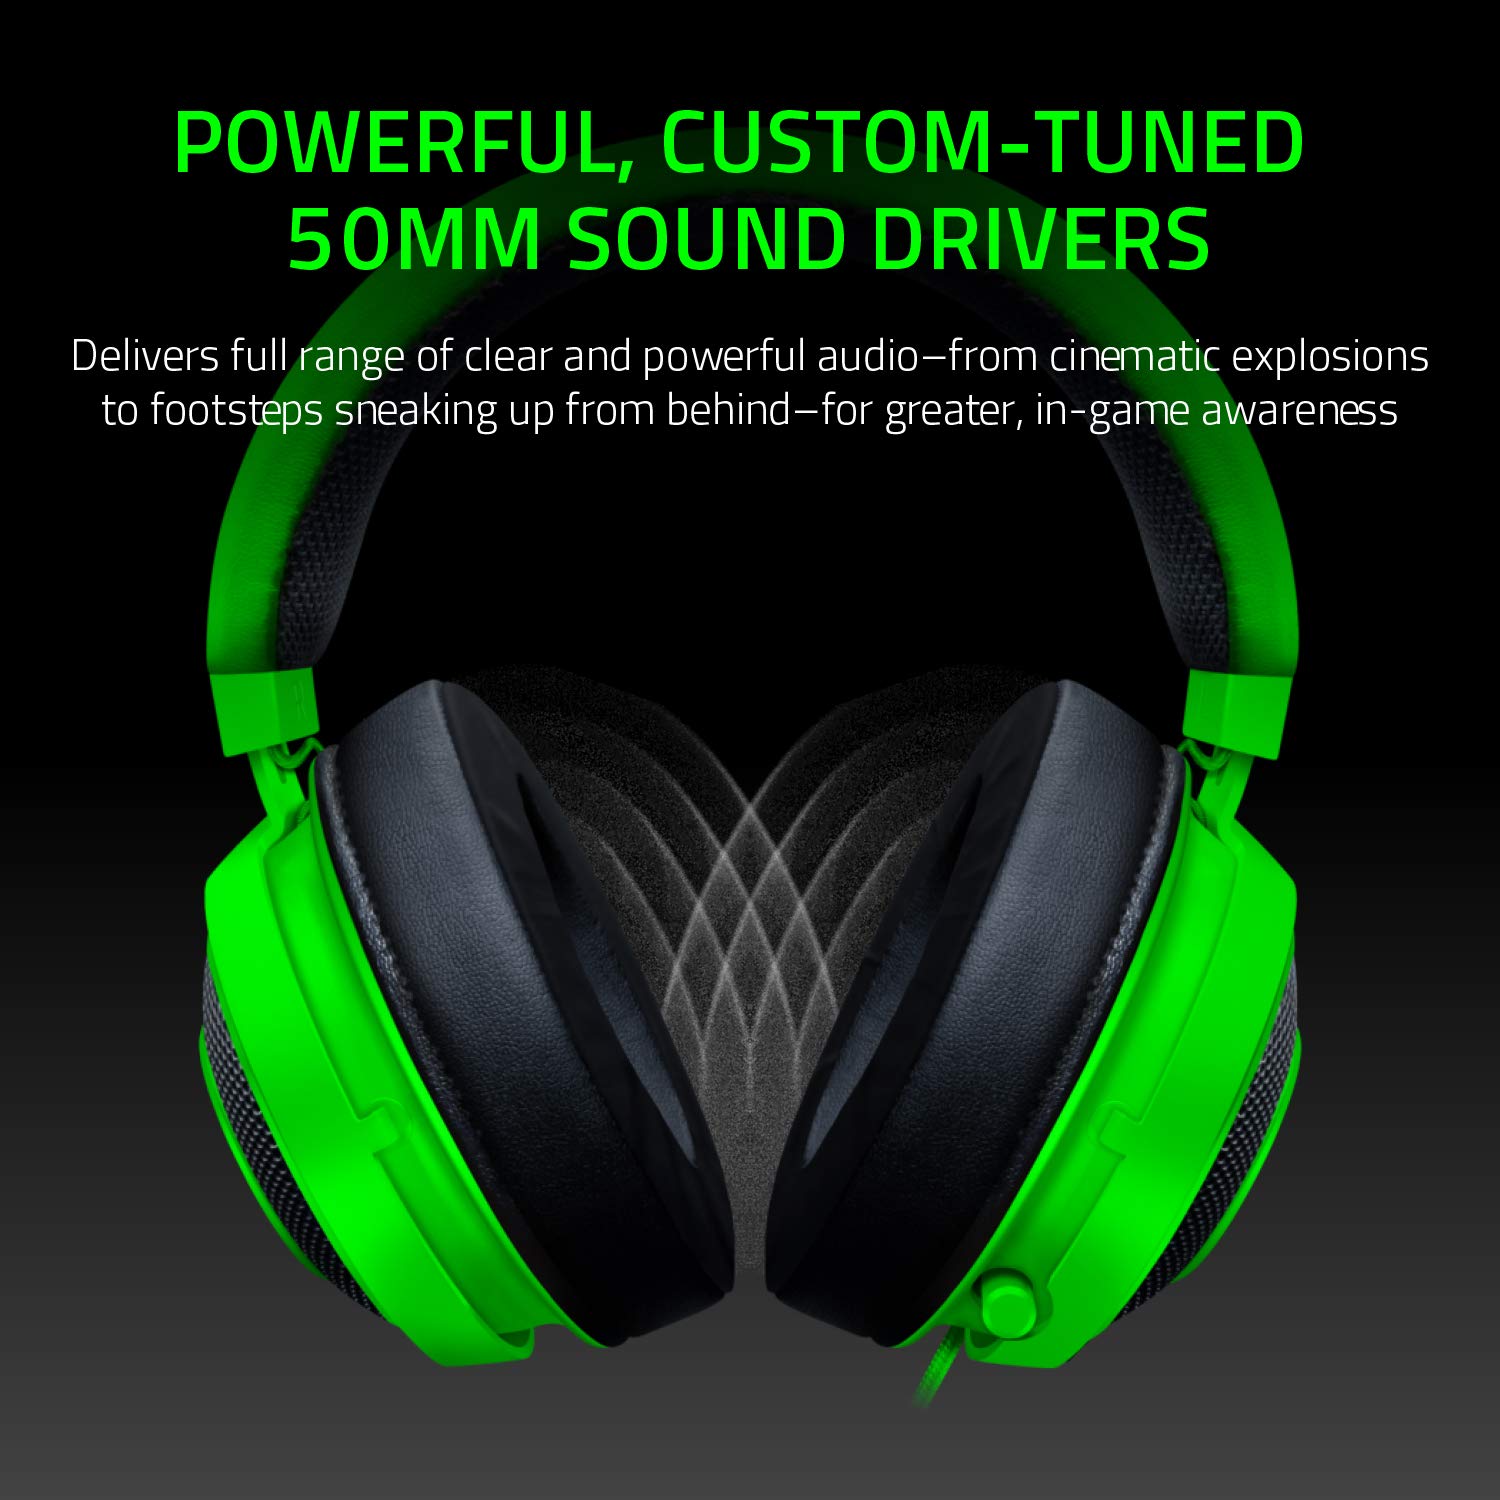 Razer Kraken Tournament Edition THX 7.1 Surround Sound Gaming Headset: Retractable Noise Cancelling Mic - USB DAC - for PC, PS4, PS5 Nintendo Switch, Xbox One, Xbox Series X, & S, Mobile – Green